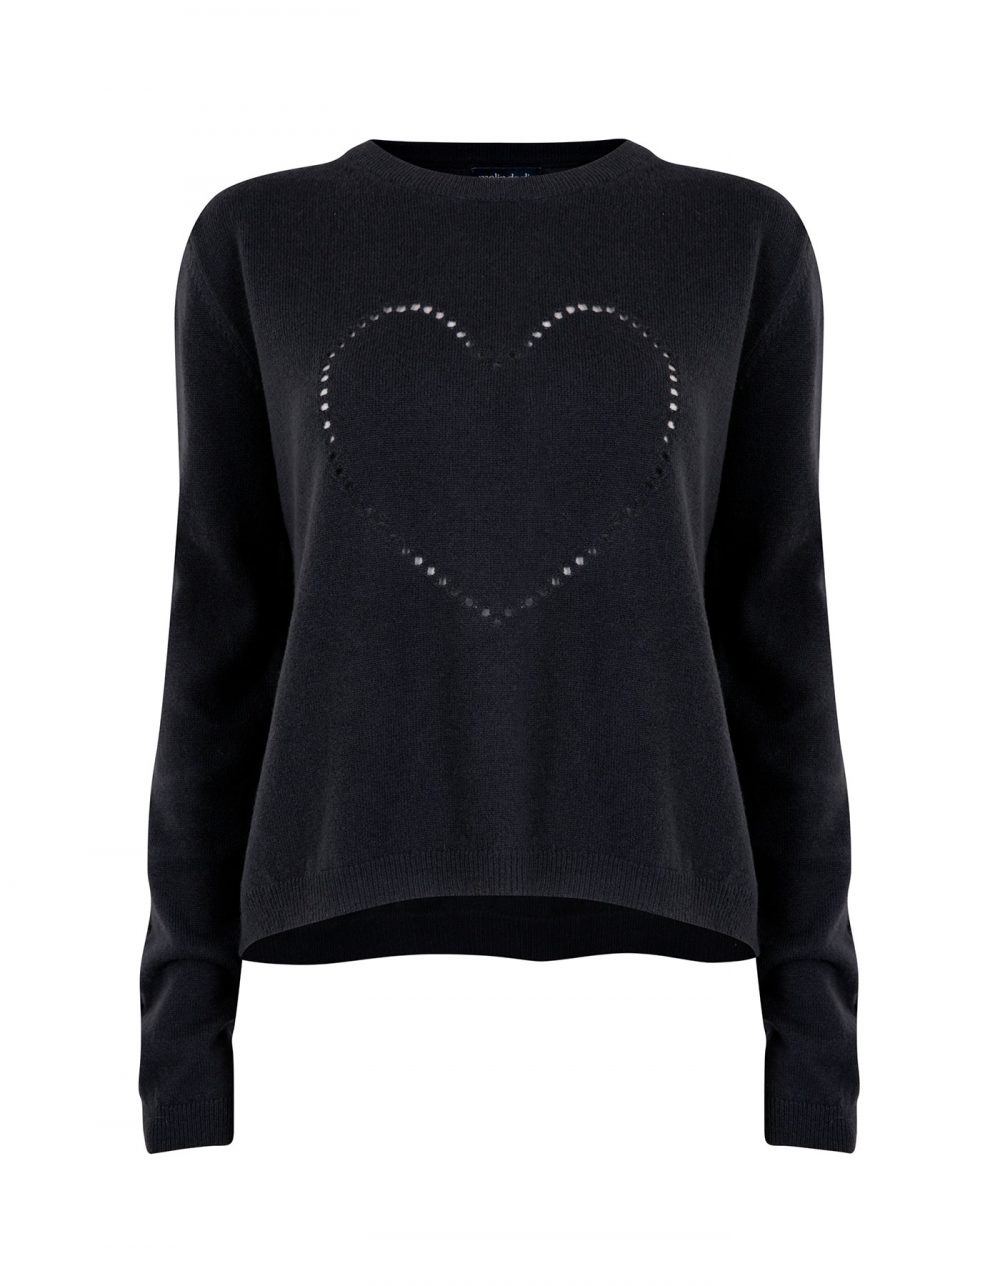 The black malin darlin Heart Holes cashmere jumper isolated on white.